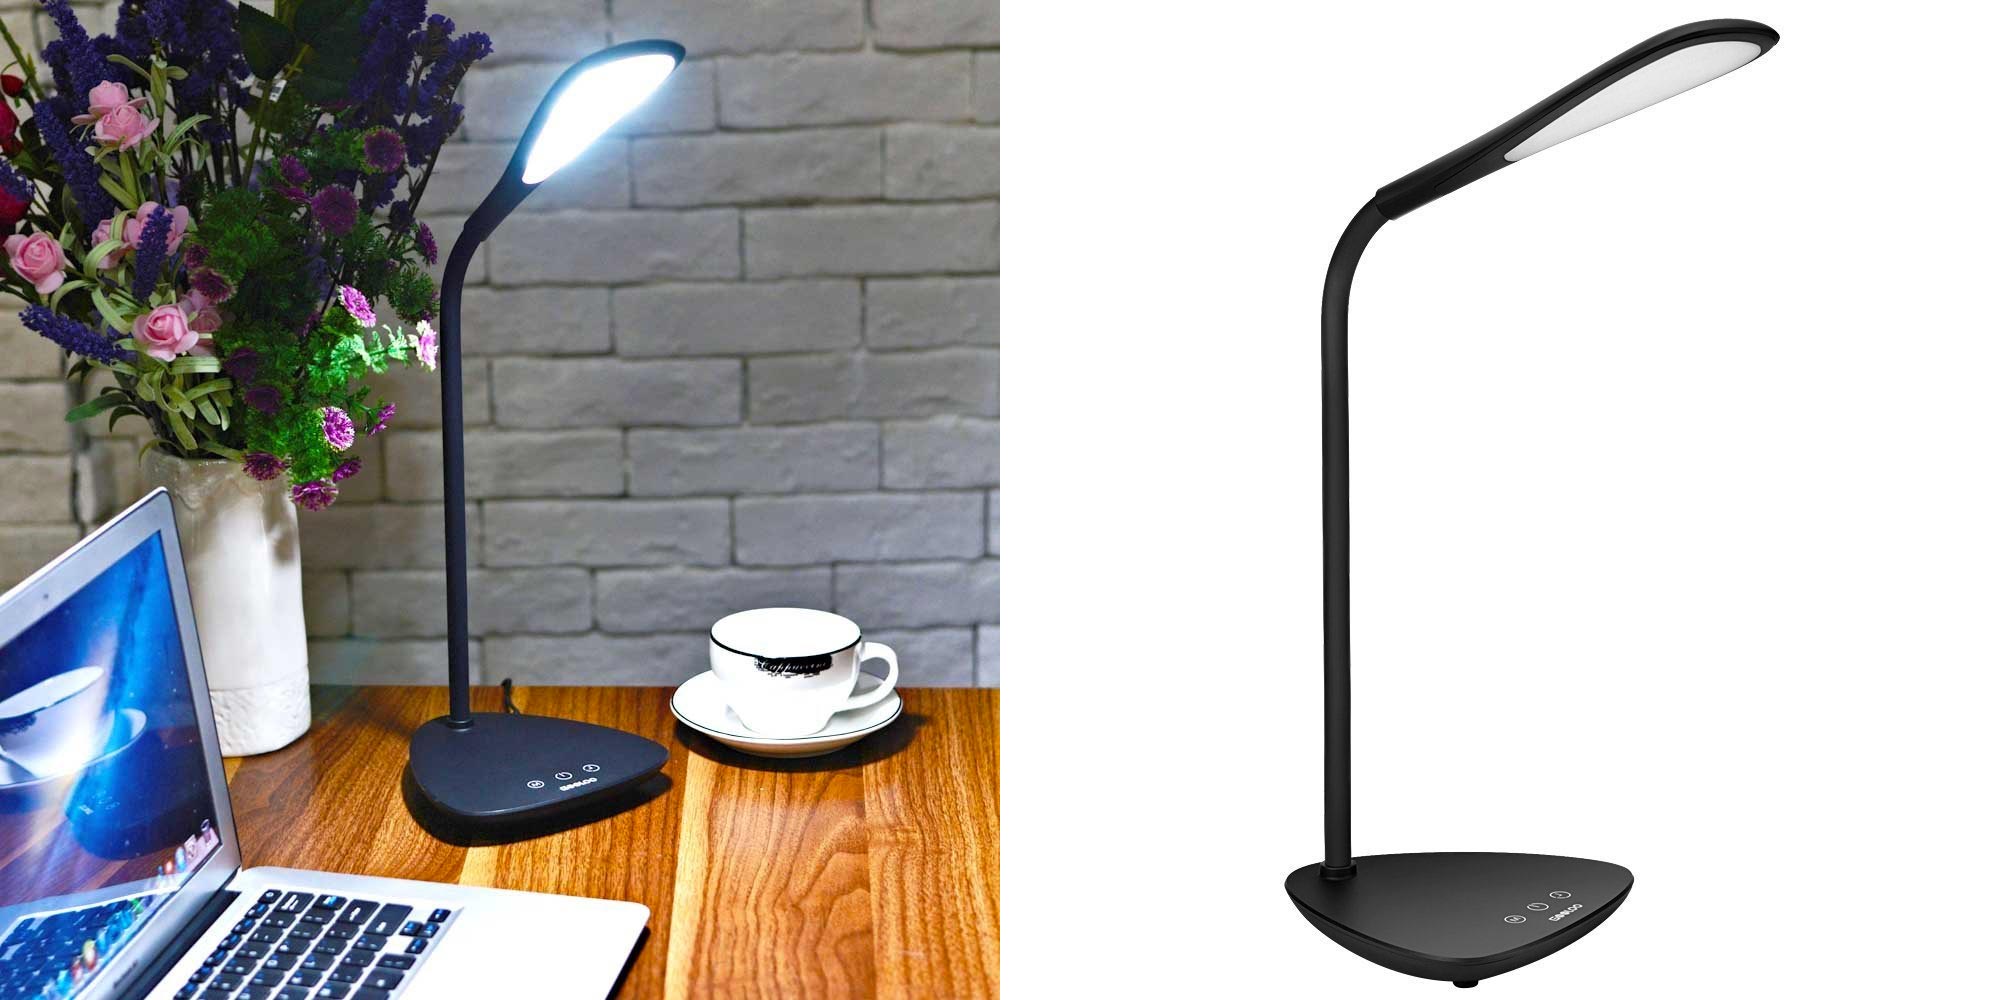 Add this 8W LED desk lamp to your home office for under $10 Prime